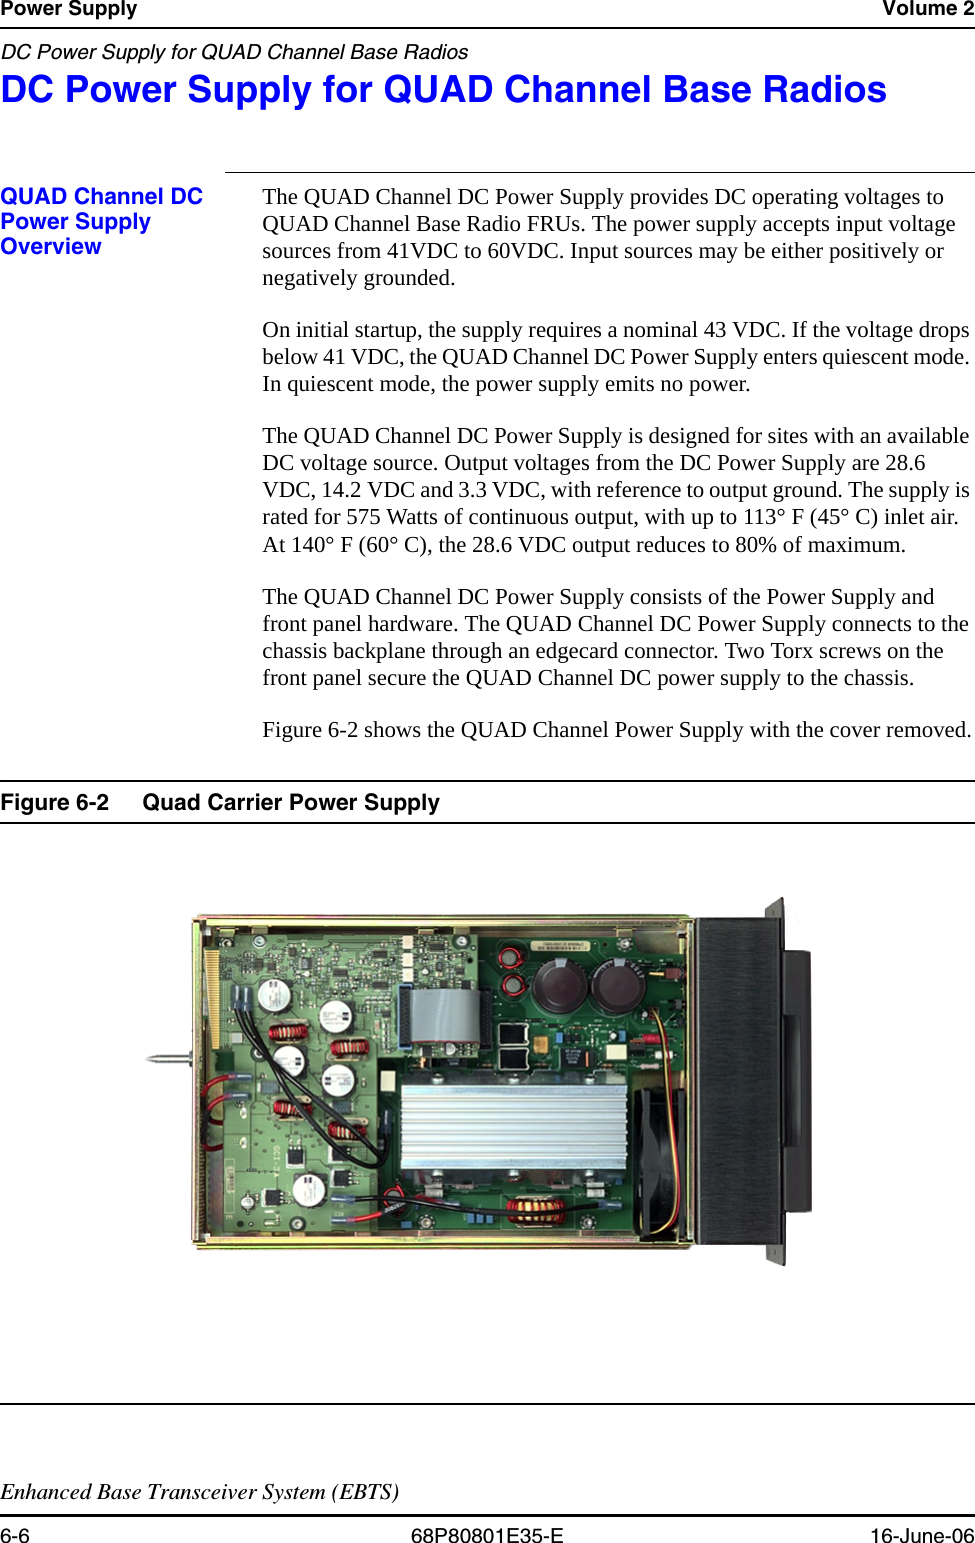 Power Supply Volume 2DC Power Supply for QUAD Channel Base RadiosEnhanced Base Transceiver System (EBTS)6-6 68P80801E35-E 16-June-06DC Power Supply for QUAD Channel Base Radios 6QUAD Channel DC Power Supply OverviewThe QUAD Channel DC Power Supply provides DC operating voltages to QUAD Channel Base Radio FRUs. The power supply accepts input voltage sources from 41VDC to 60VDC. Input sources may be either positively or negatively grounded.On initial startup, the supply requires a nominal 43 VDC. If the voltage drops below 41 VDC, the QUAD Channel DC Power Supply enters quiescent mode. In quiescent mode, the power supply emits no power.The QUAD Channel DC Power Supply is designed for sites with an available DC voltage source. Output voltages from the DC Power Supply are 28.6 VDC, 14.2 VDC and 3.3 VDC, with reference to output ground. The supply is rated for 575 Watts of continuous output, with up to 113° F (45° C) inlet air. At 140° F (60° C), the 28.6 VDC output reduces to 80% of maximum. The QUAD Channel DC Power Supply consists of the Power Supply and front panel hardware. The QUAD Channel DC Power Supply connects to the chassis backplane through an edgecard connector. Two Torx screws on the front panel secure the QUAD Channel DC power supply to the chassis.Figure 6-2 shows the QUAD Channel Power Supply with the cover removed.Figure 6-2 Quad Carrier Power Supply 